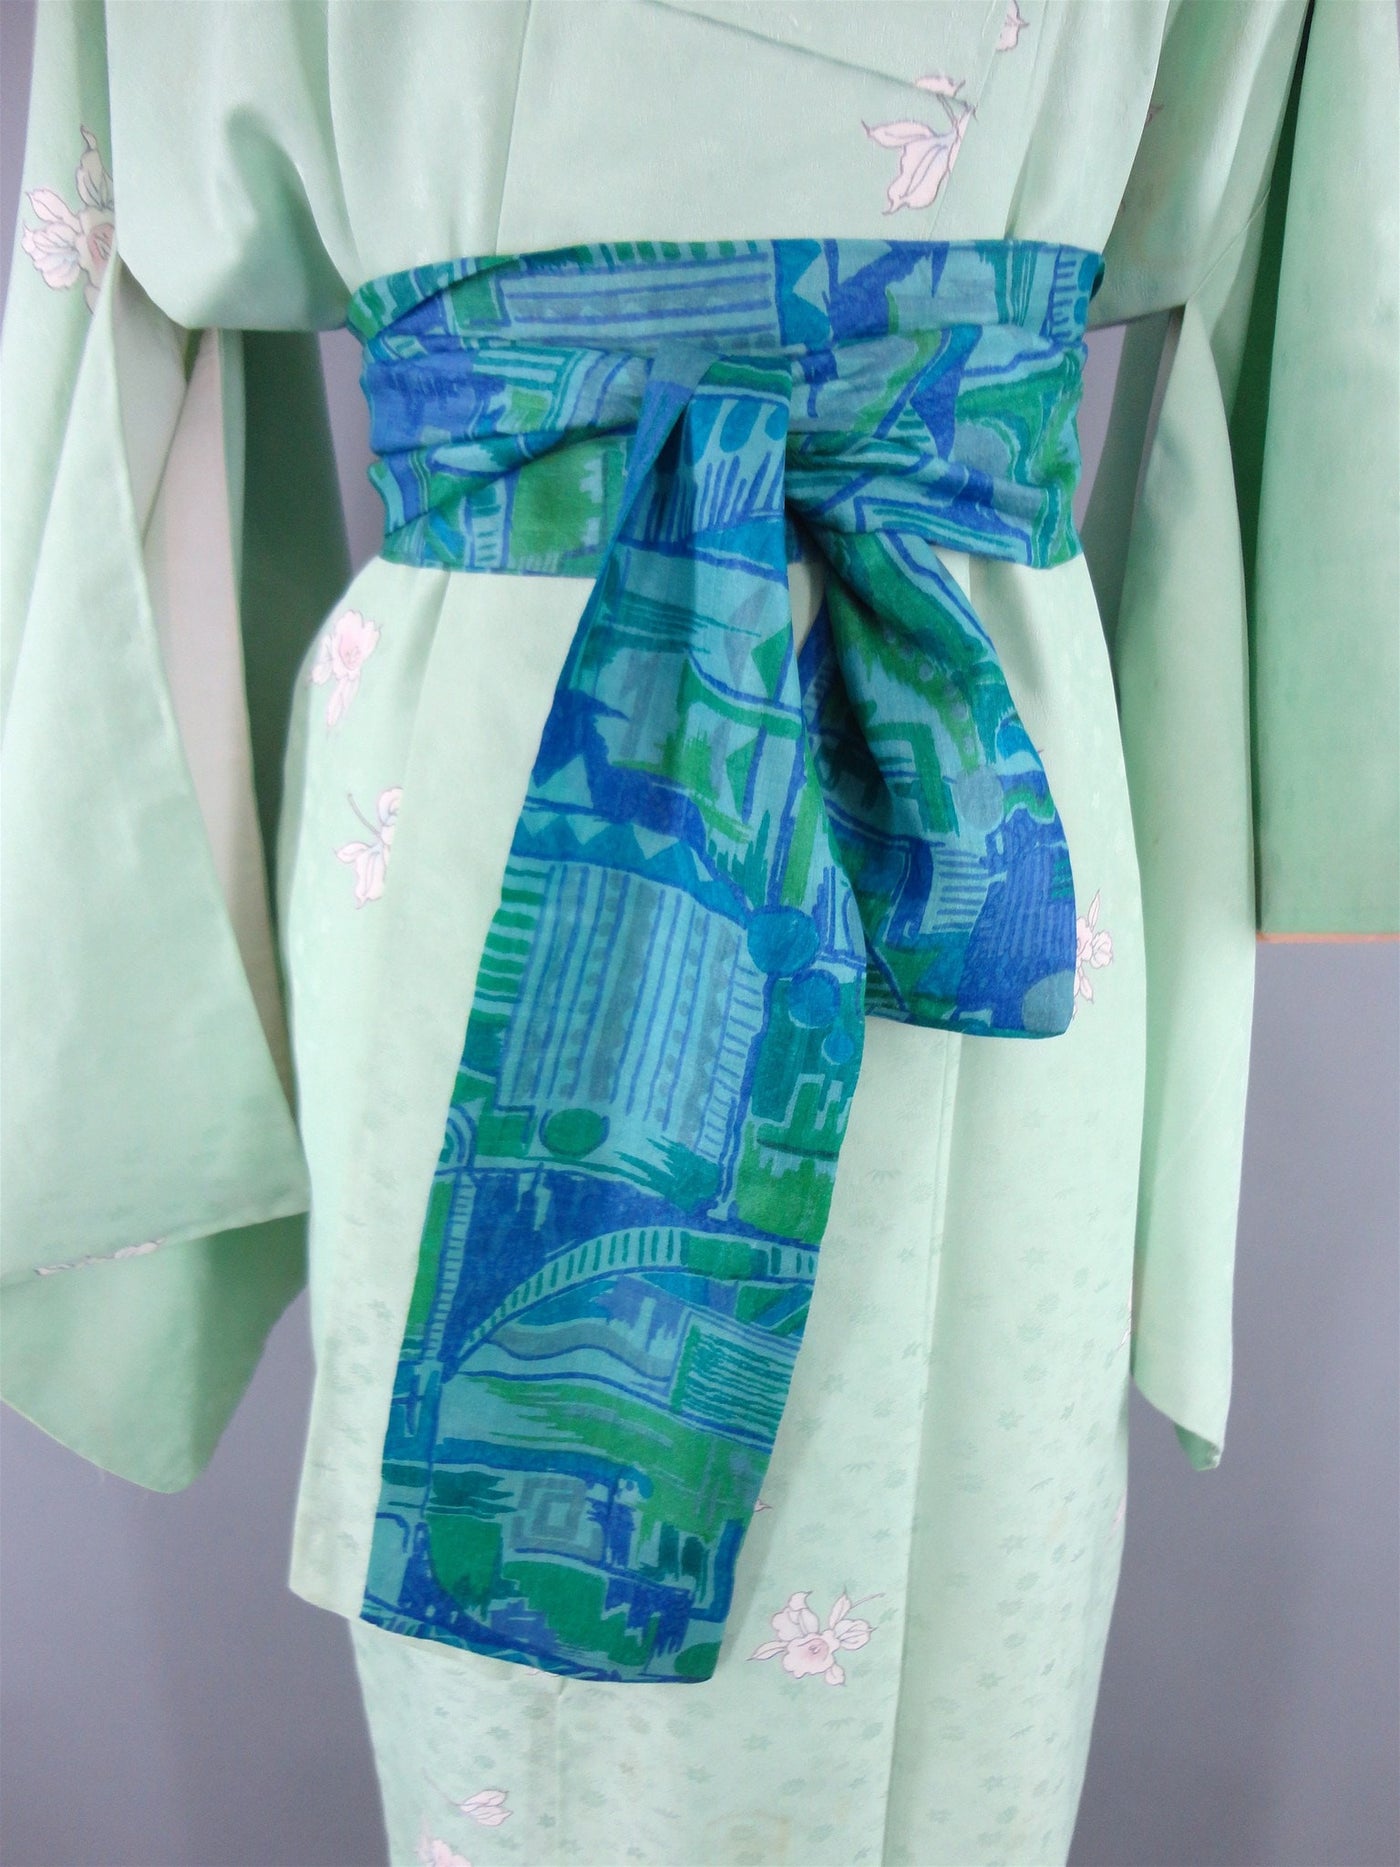 1960s Vintage Silk Kimono Robe with Green Orchid Floral Print - ThisBlueBird